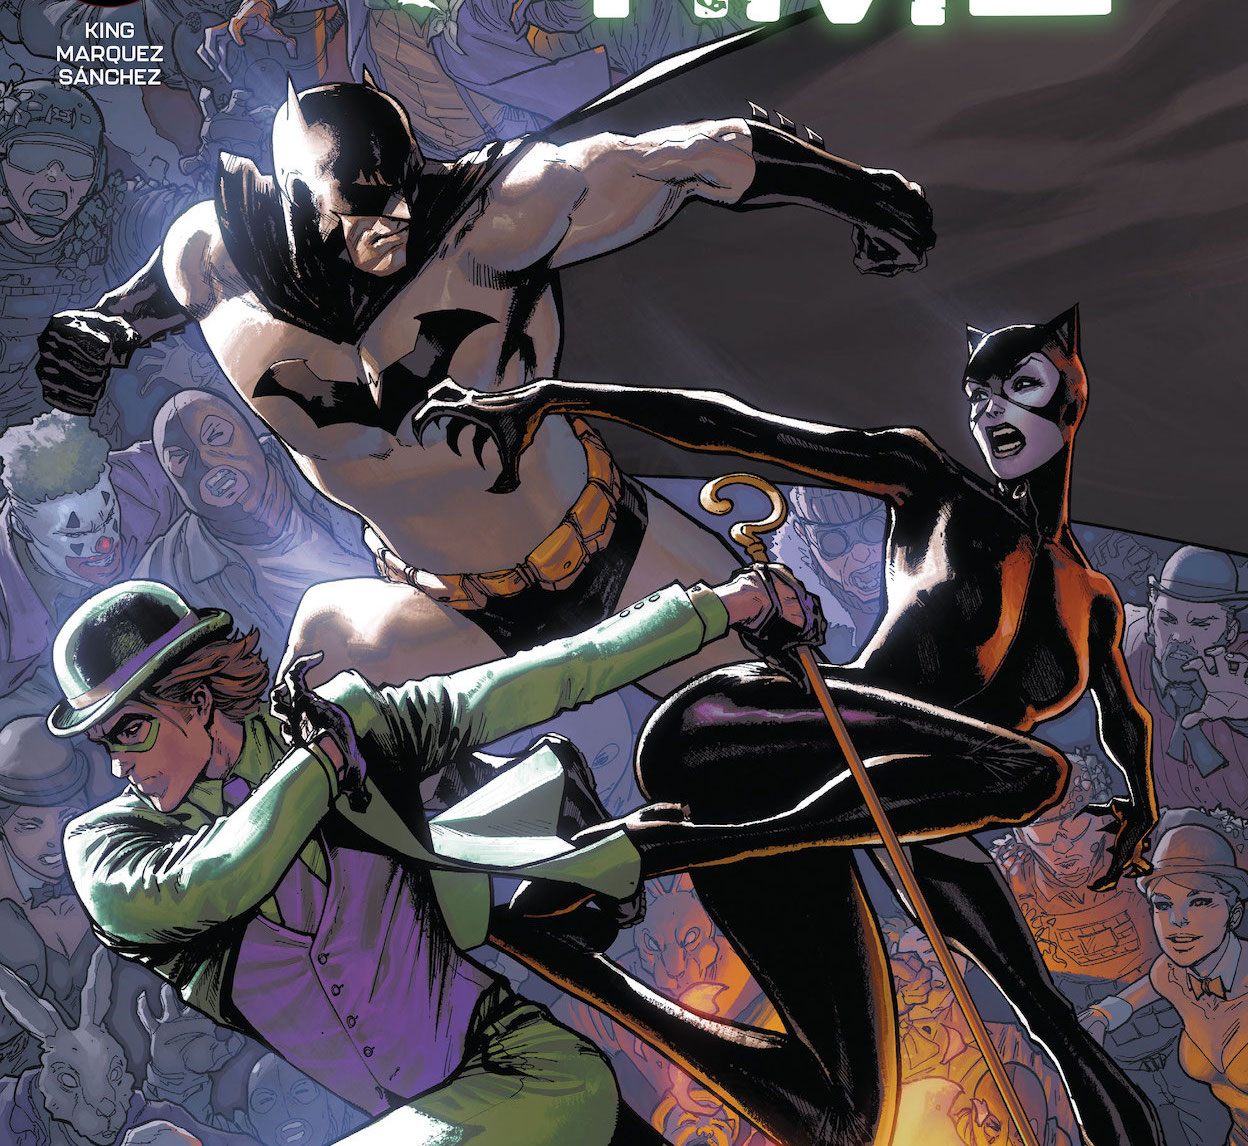 'Batman: Killing Time' #5 is an edge-of-your-seat penultimate issue